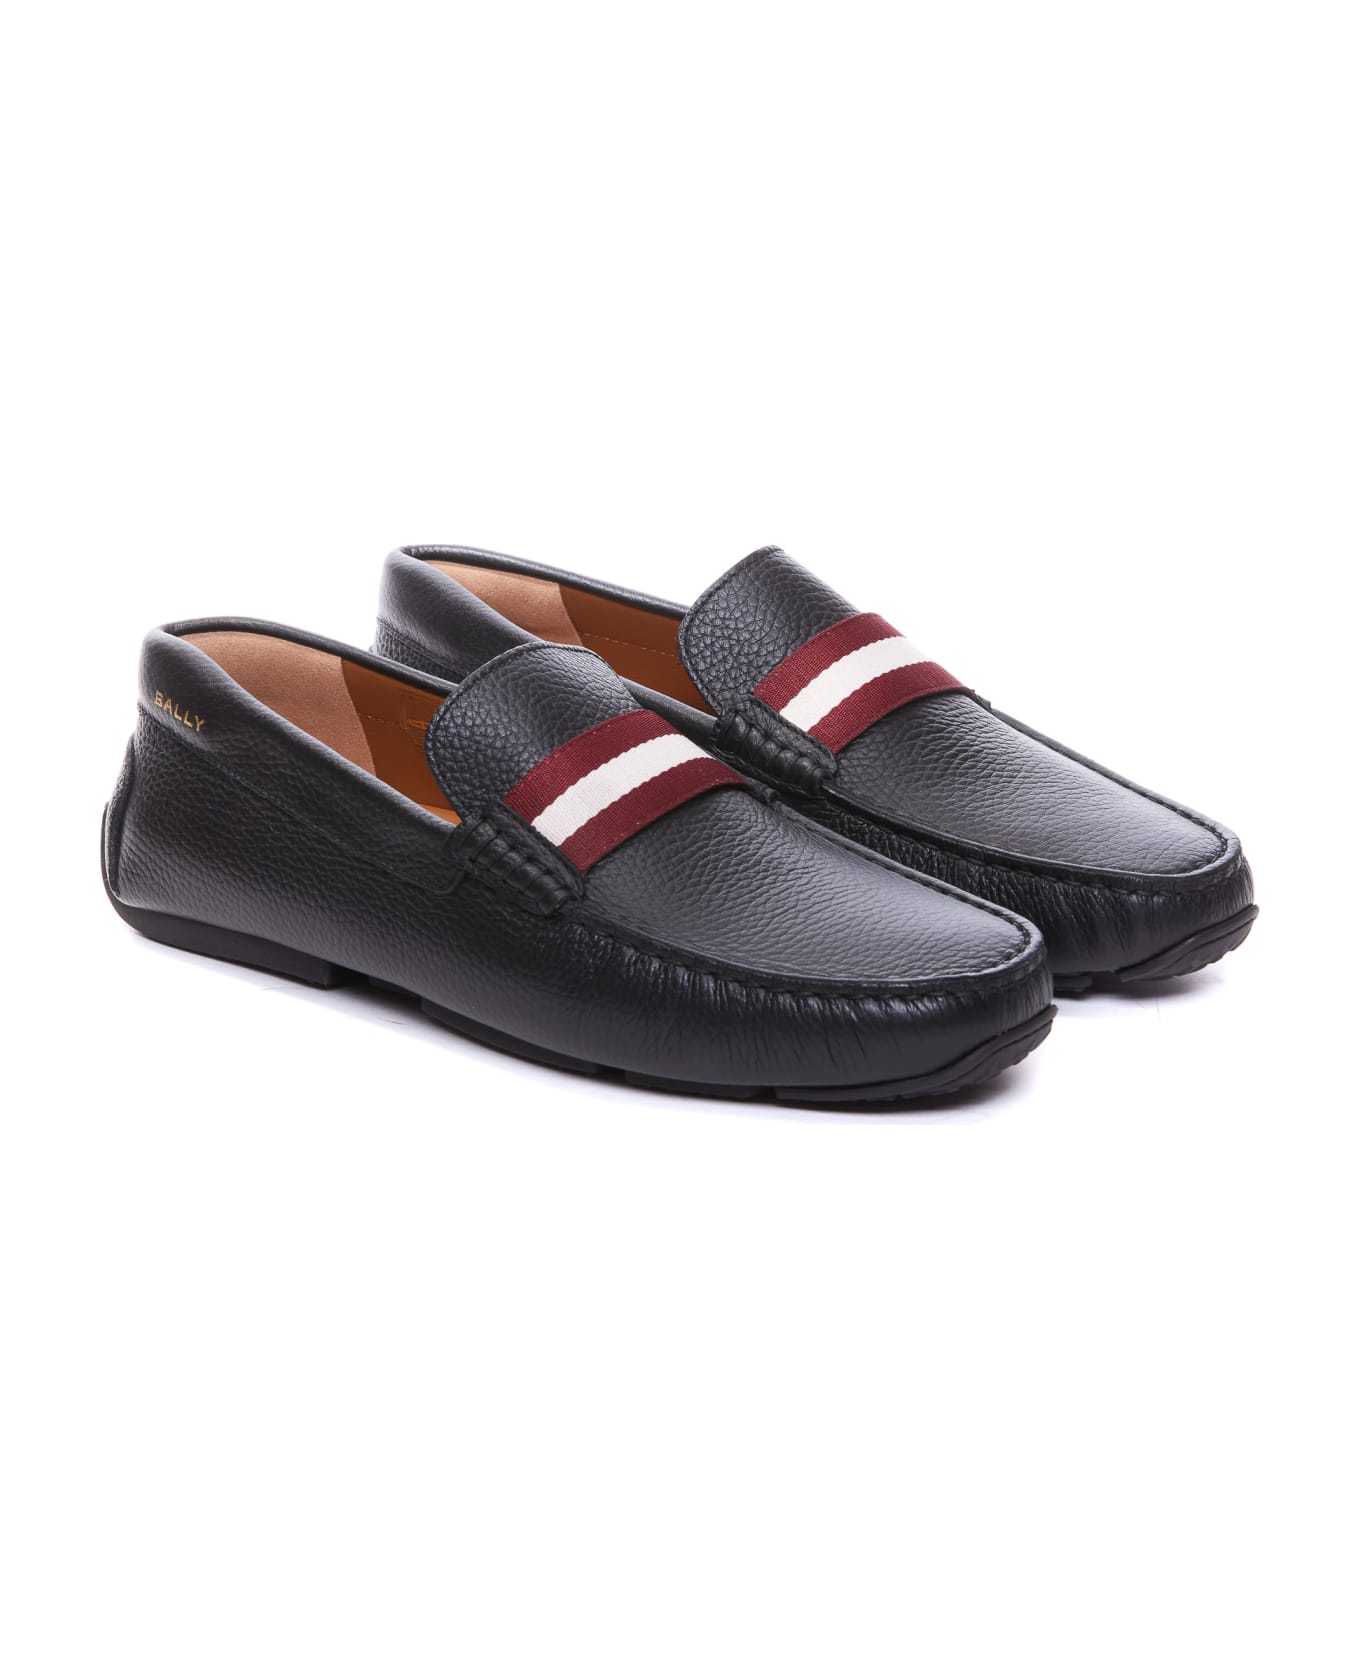 Bally Perthy Loafers - Black